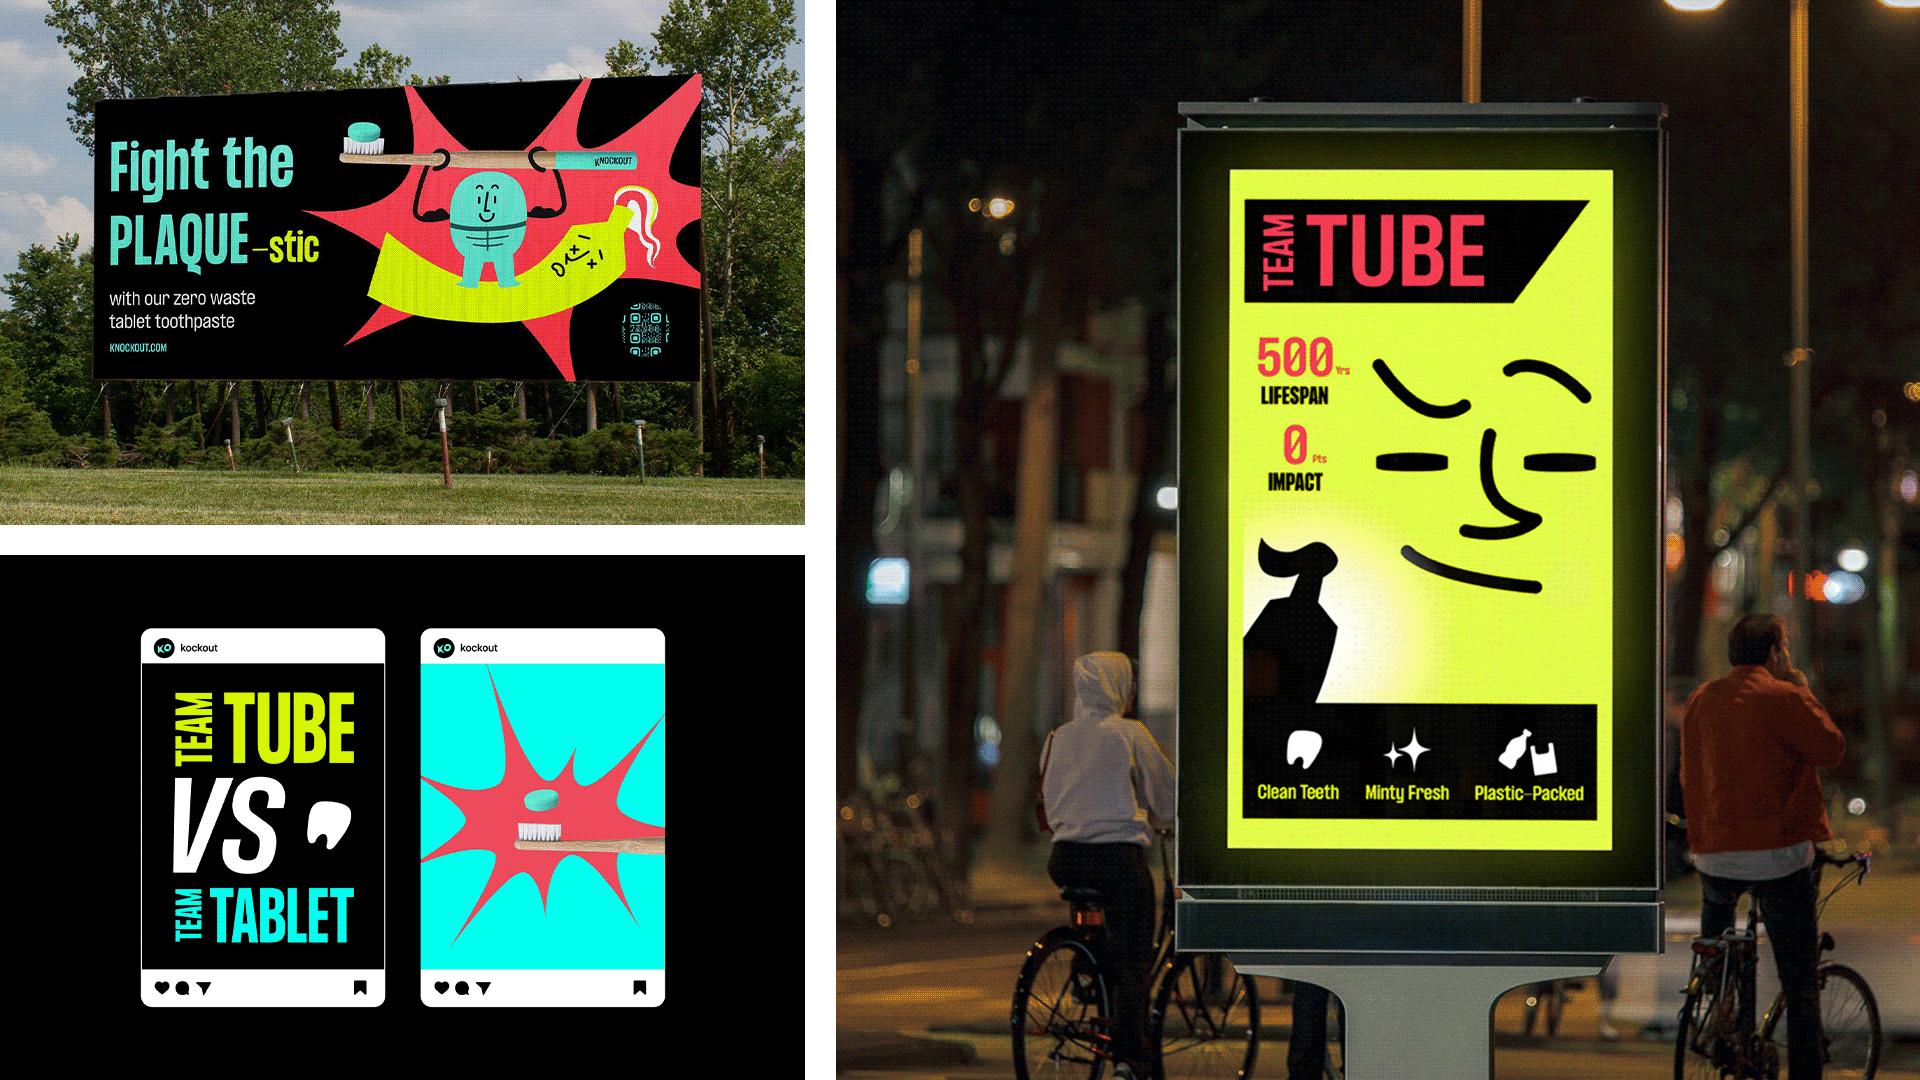 Three separate images. Top left image includes a printed billboard in a grassy field, reading “Fight the PLAQUE-stic.” Bottom left image includes two static images of Instagram posts. The left Instagram post reads “Team Tube verses Team Tablet.” The right Instagram post is a photo of a floating tablet toothpaste and toothbrush. Right image includes an animating gif of a digital poster.